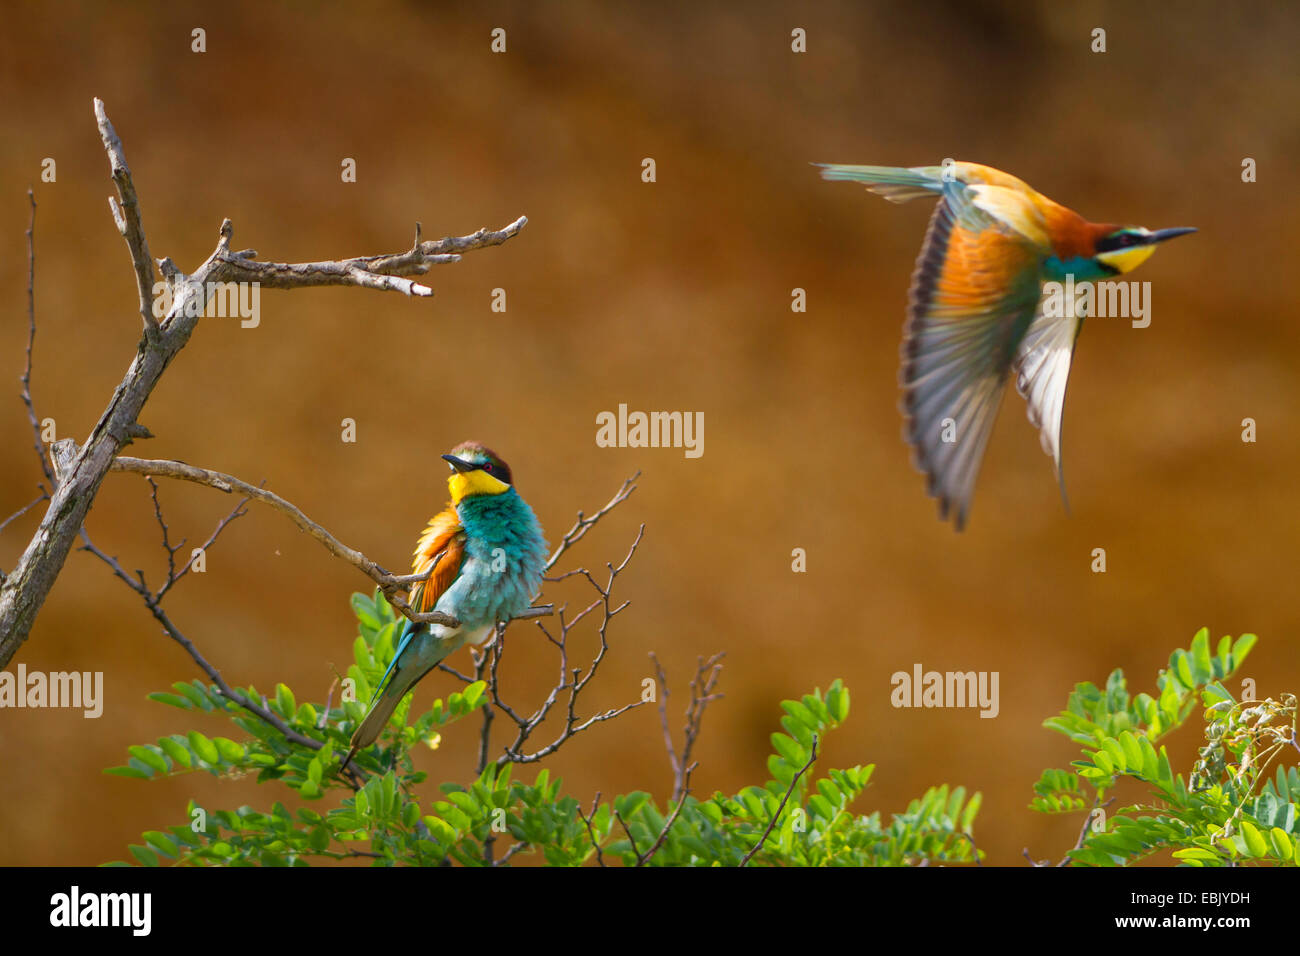 European bee eater (Merops apiaster), flying away from a twig, Austria, Burgenland Stock Photo